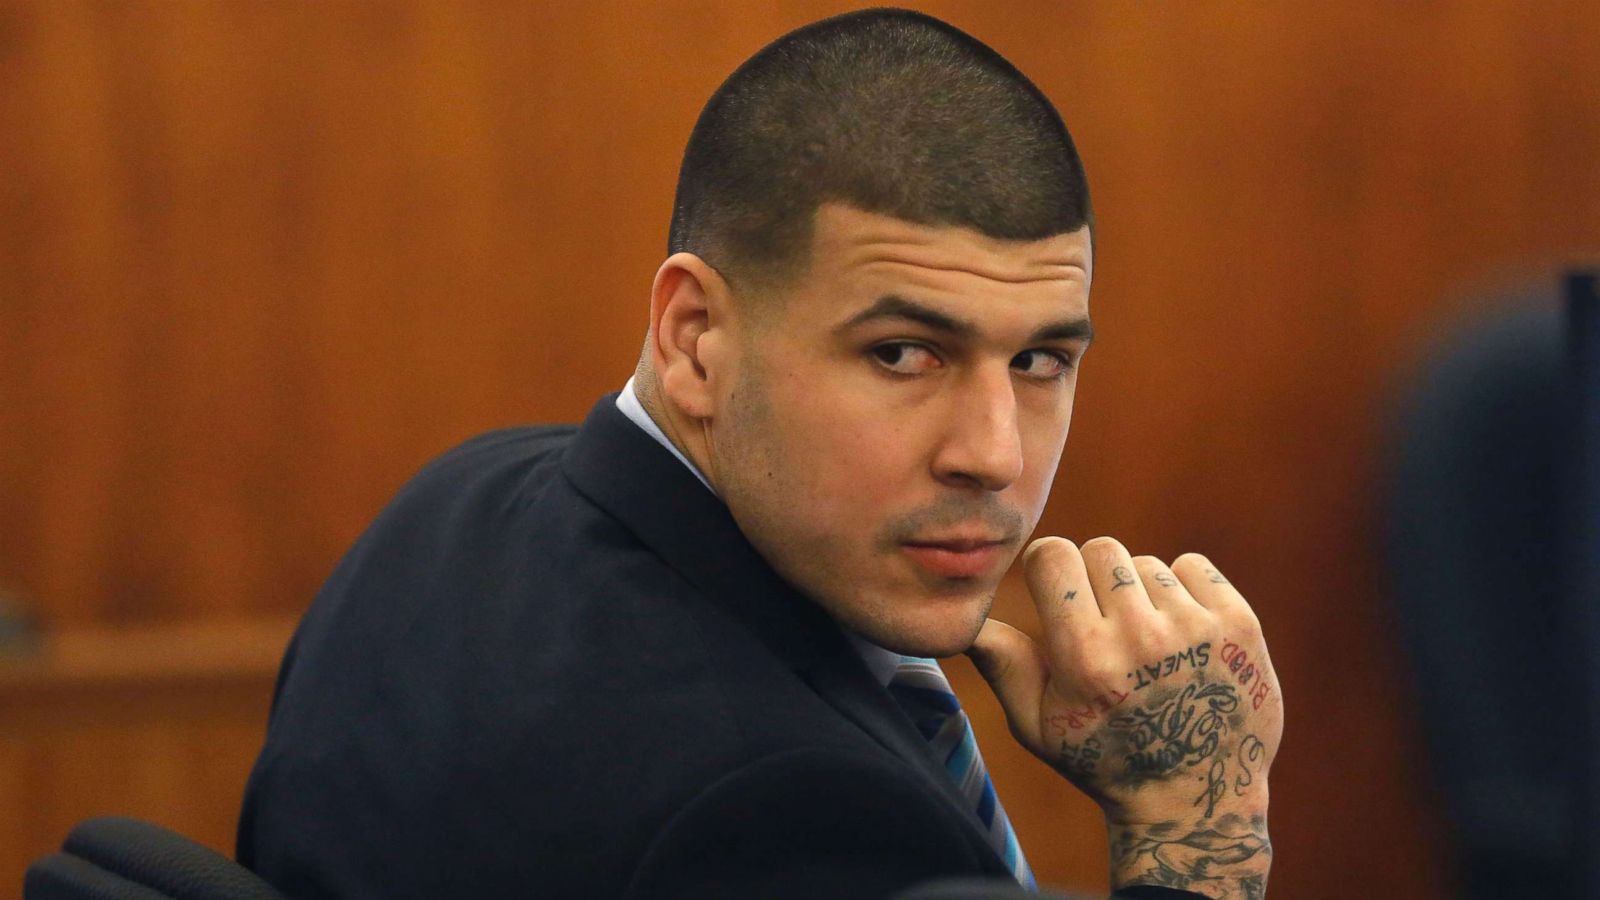 Aaron Hernandez family wants player's brain examined for signs of CTE, NFL